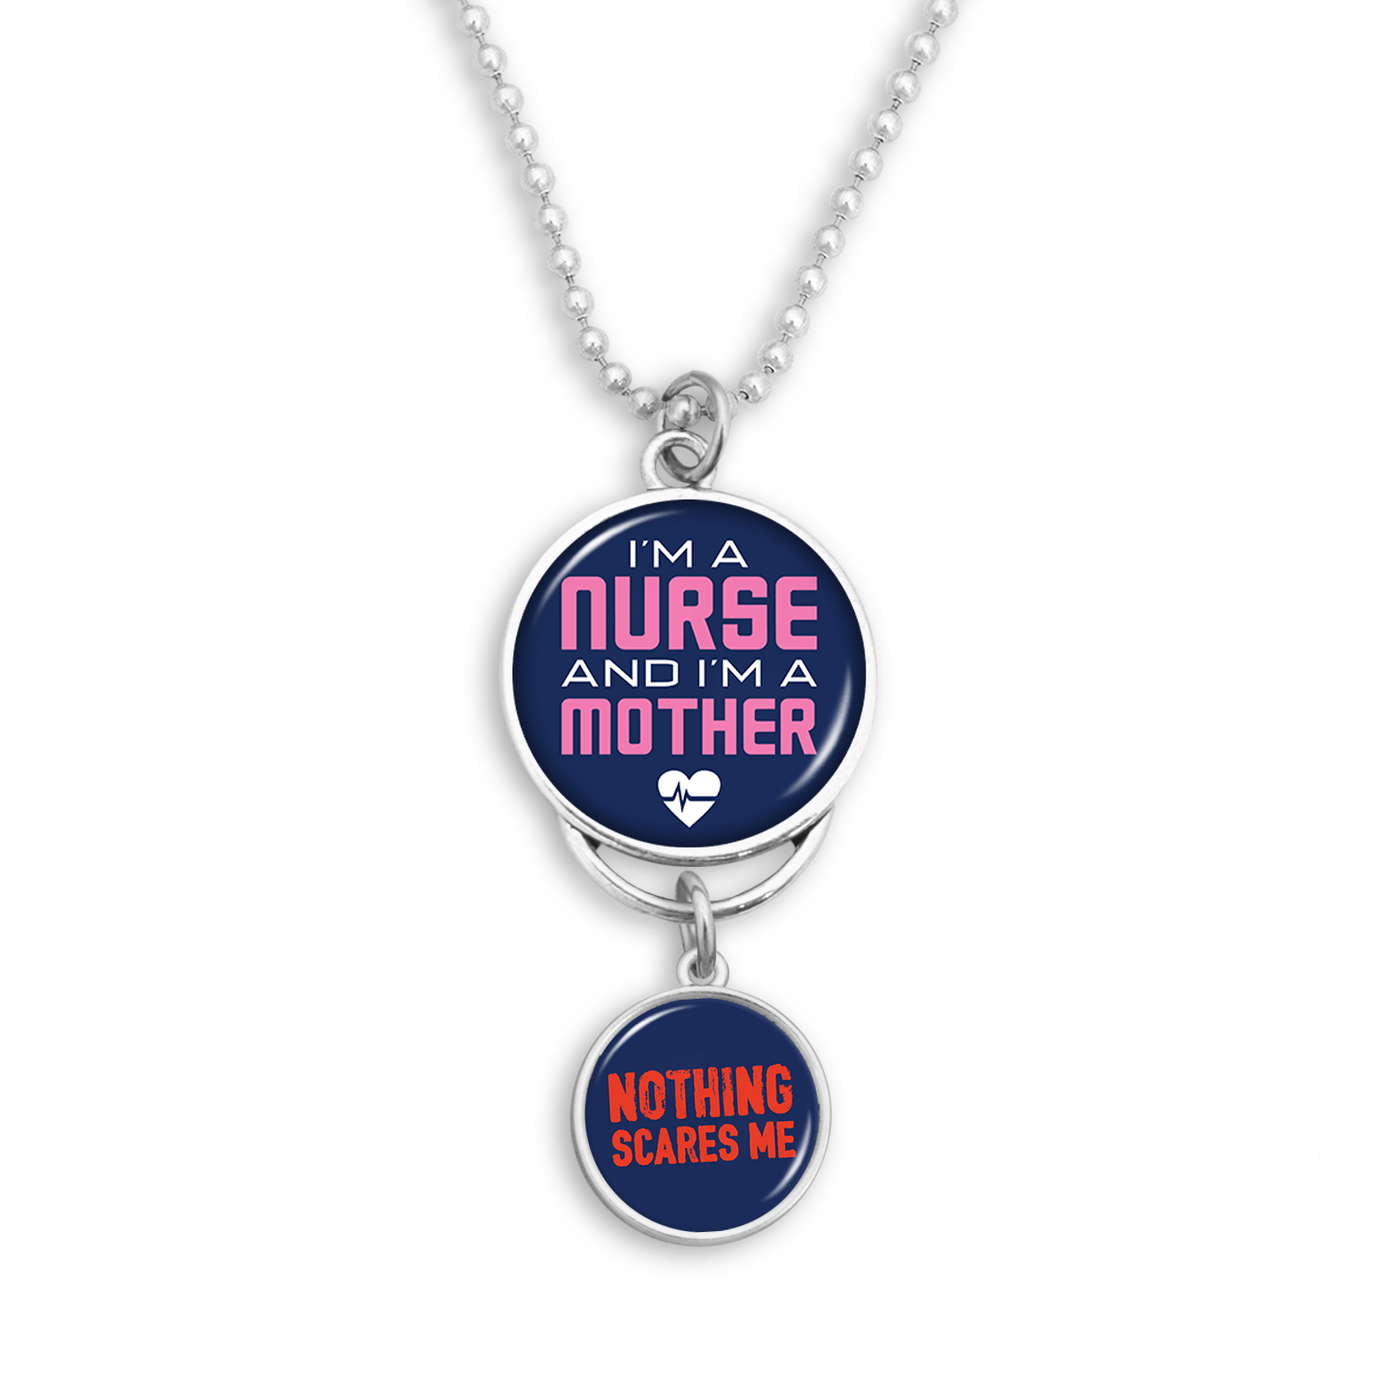 I'm A Nurse And A Mother, Nothing Scares Me Rearview Mirror Charm